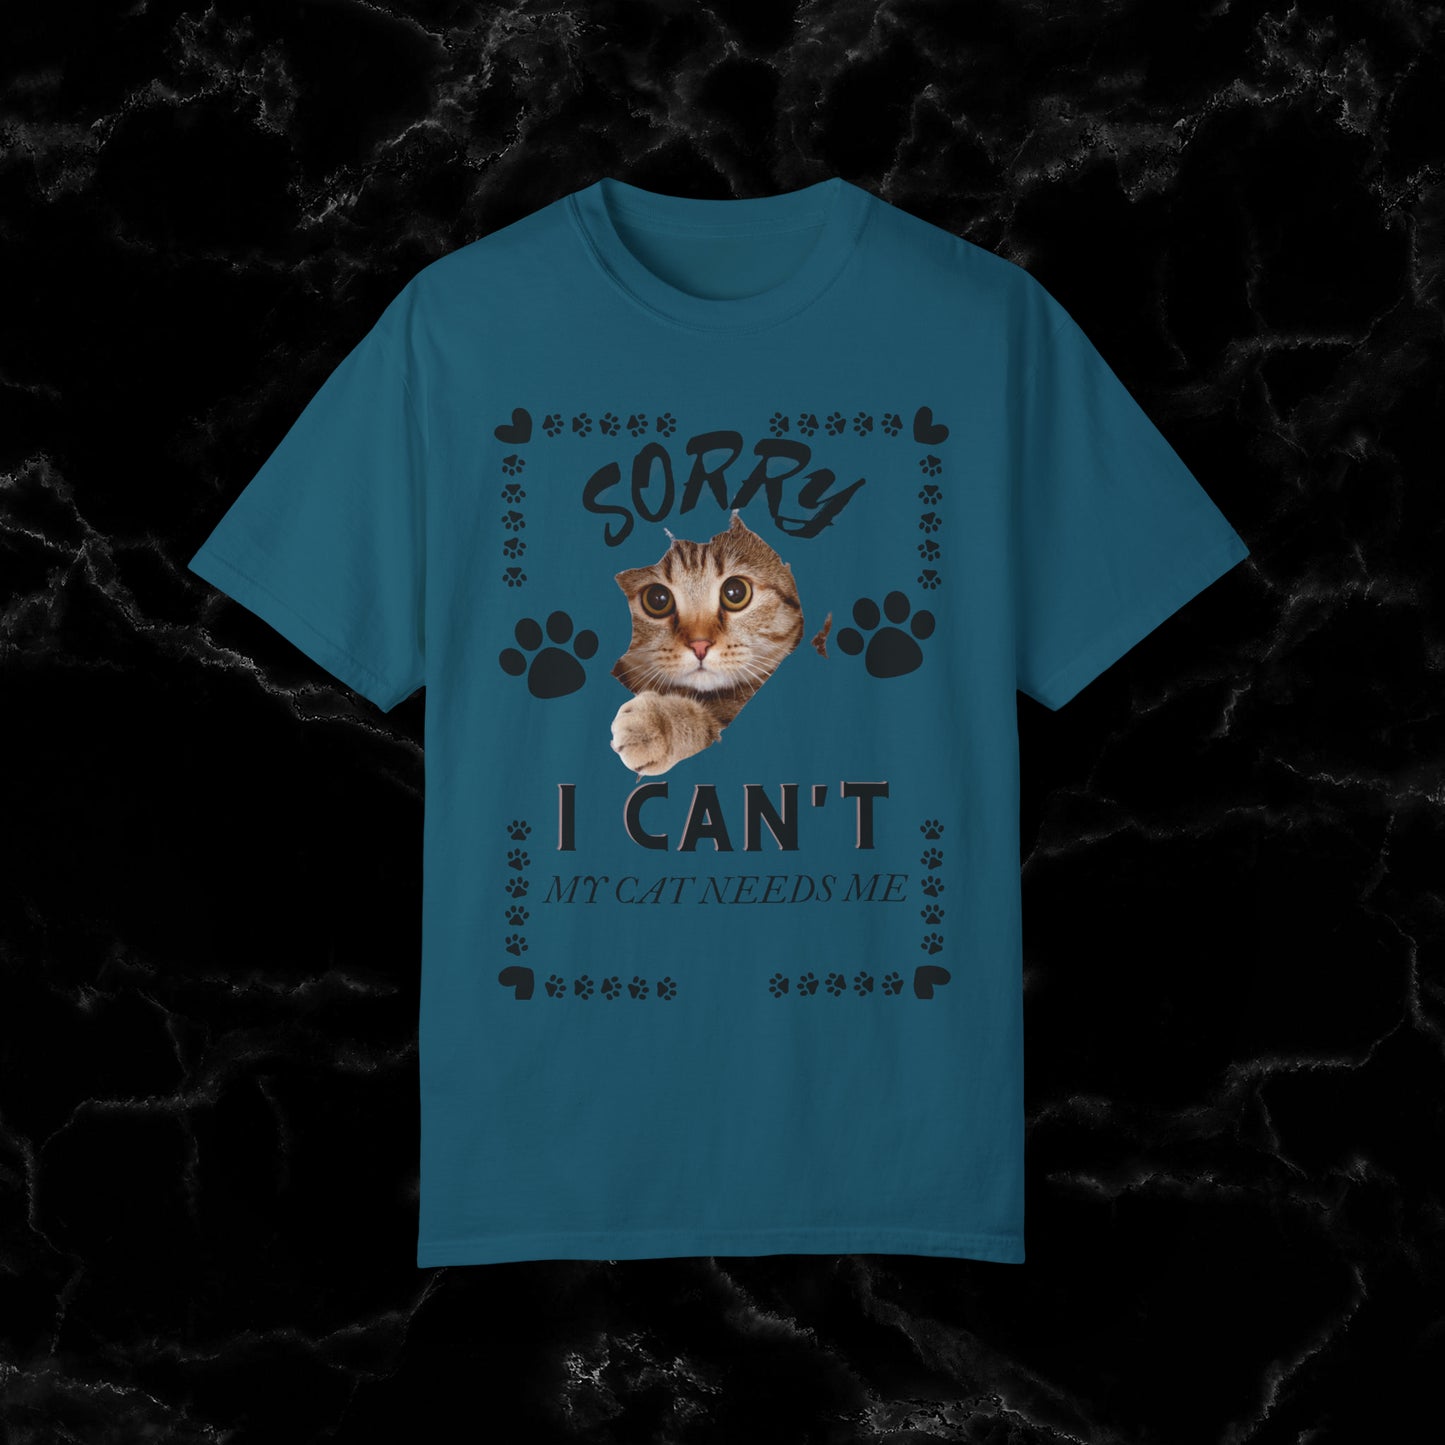 Sorry I Can't, My Cat Needs Me T-Shirt - Perfect Gift for Cat Moms and Animal Lovers T-Shirt Topaz Blue S 